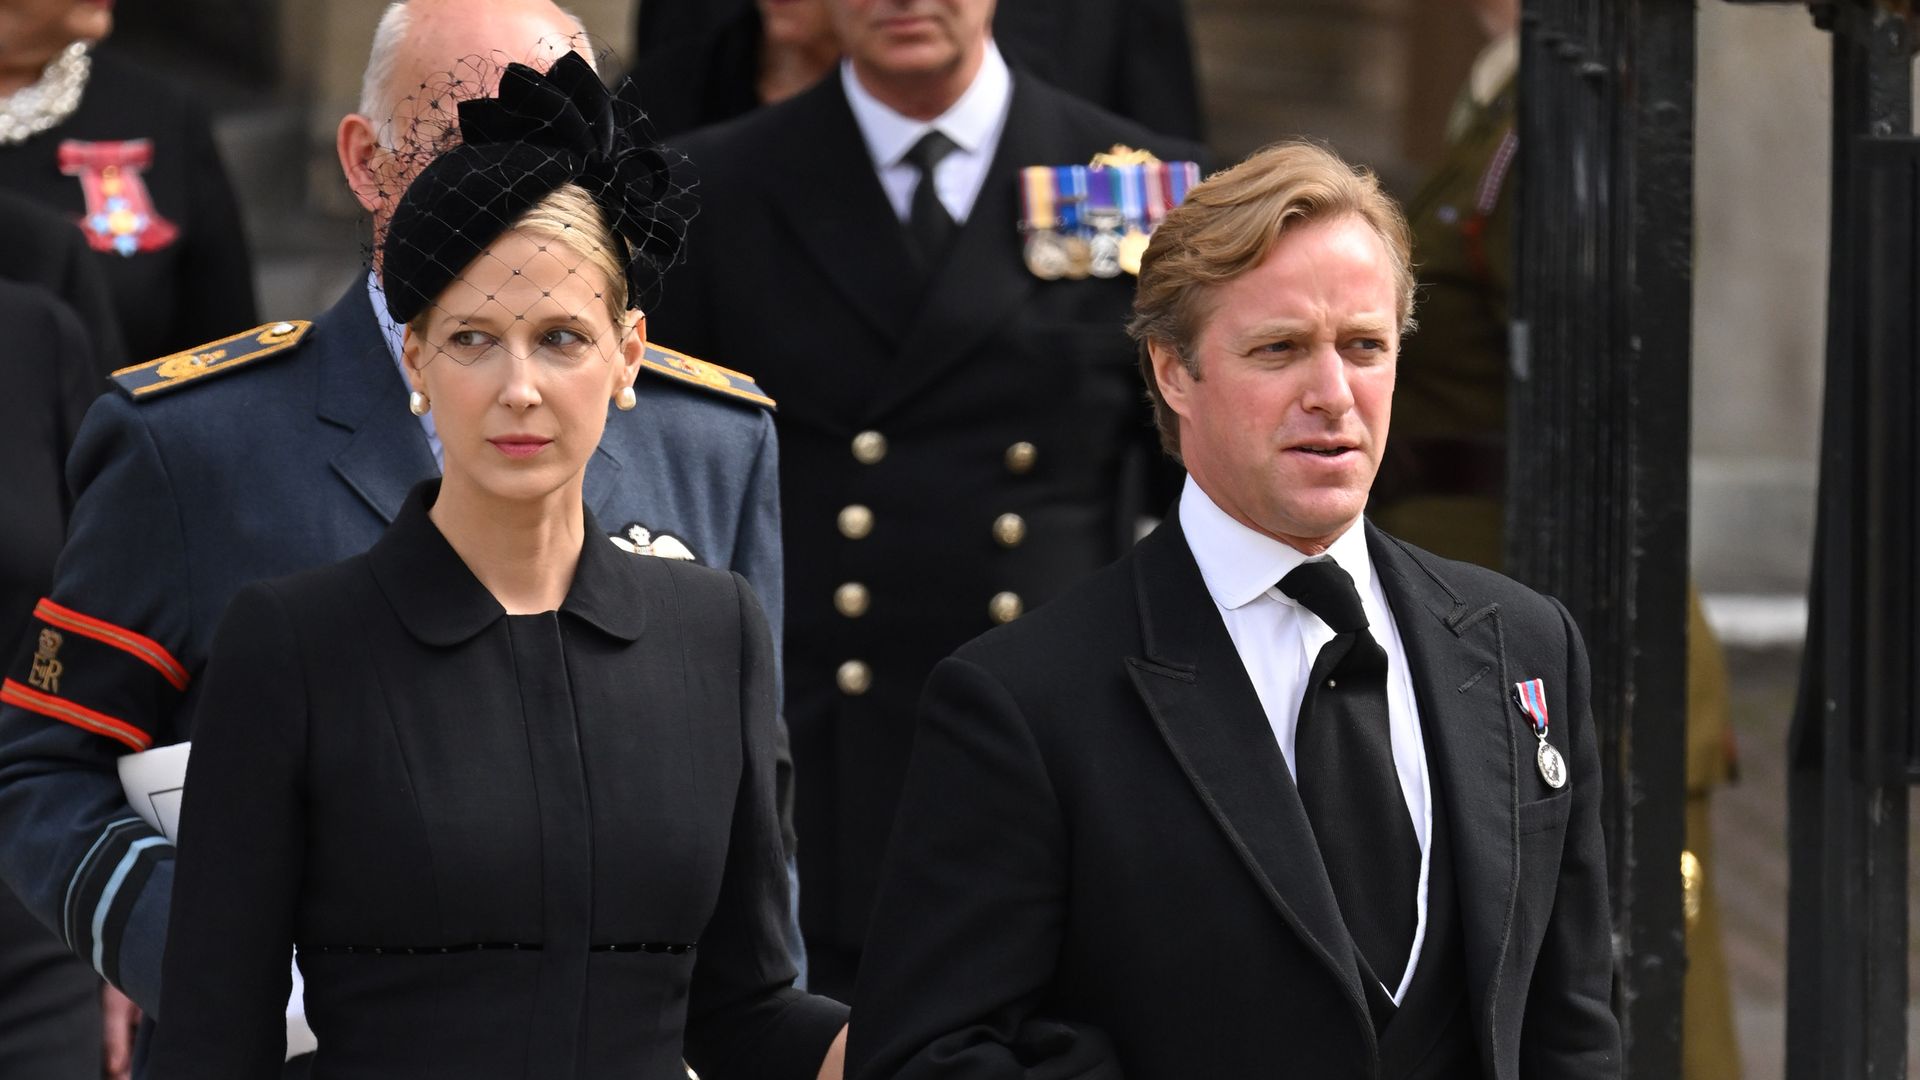 Lady Gabriella Kingston and Thomas Kingston during the State Funeral of Queen Elizabeth II on September 19, 2022